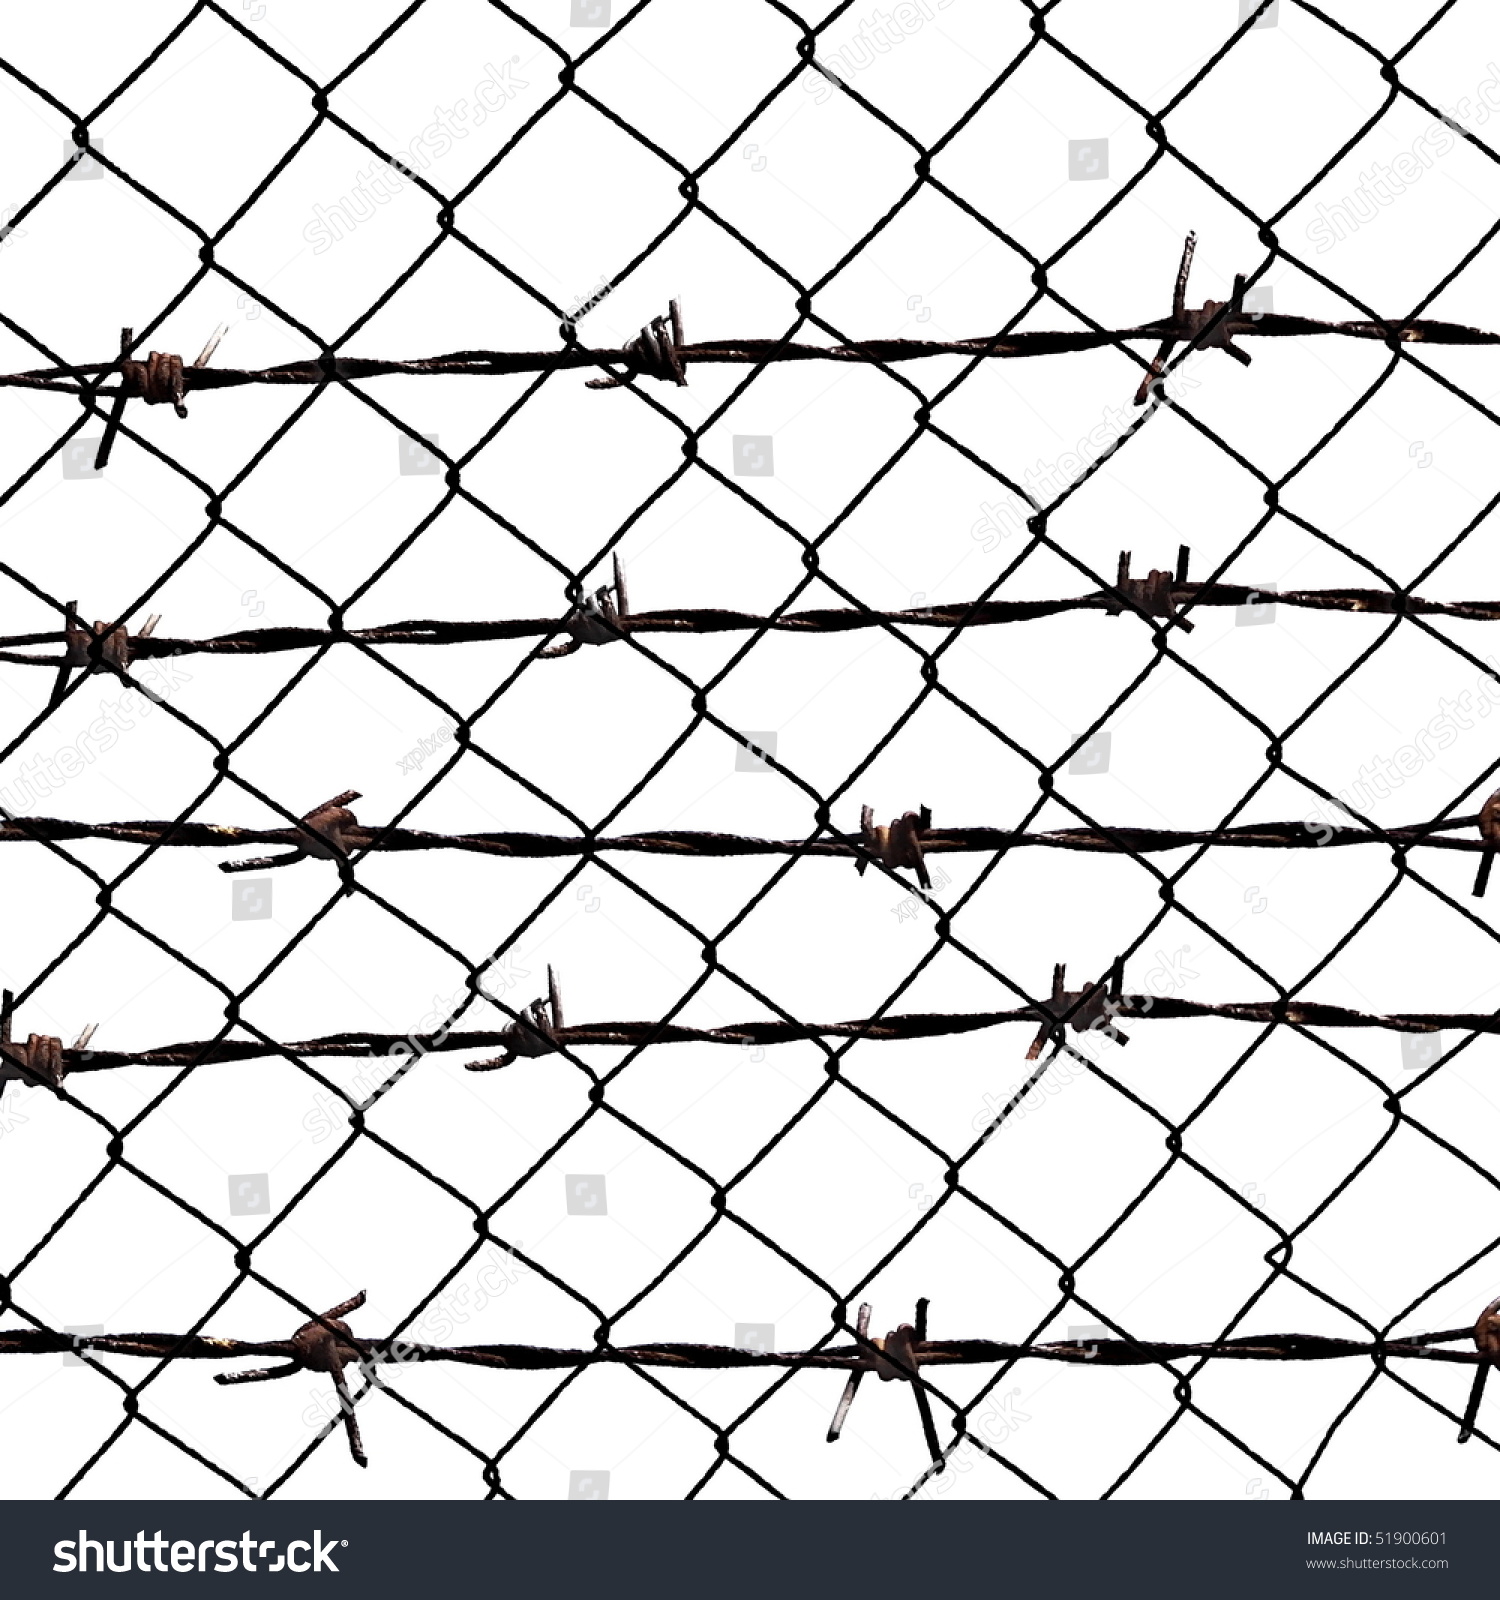 Metal Barbed Wire Fence Protection Isolated: стоковая иллюстрация, 51900601...